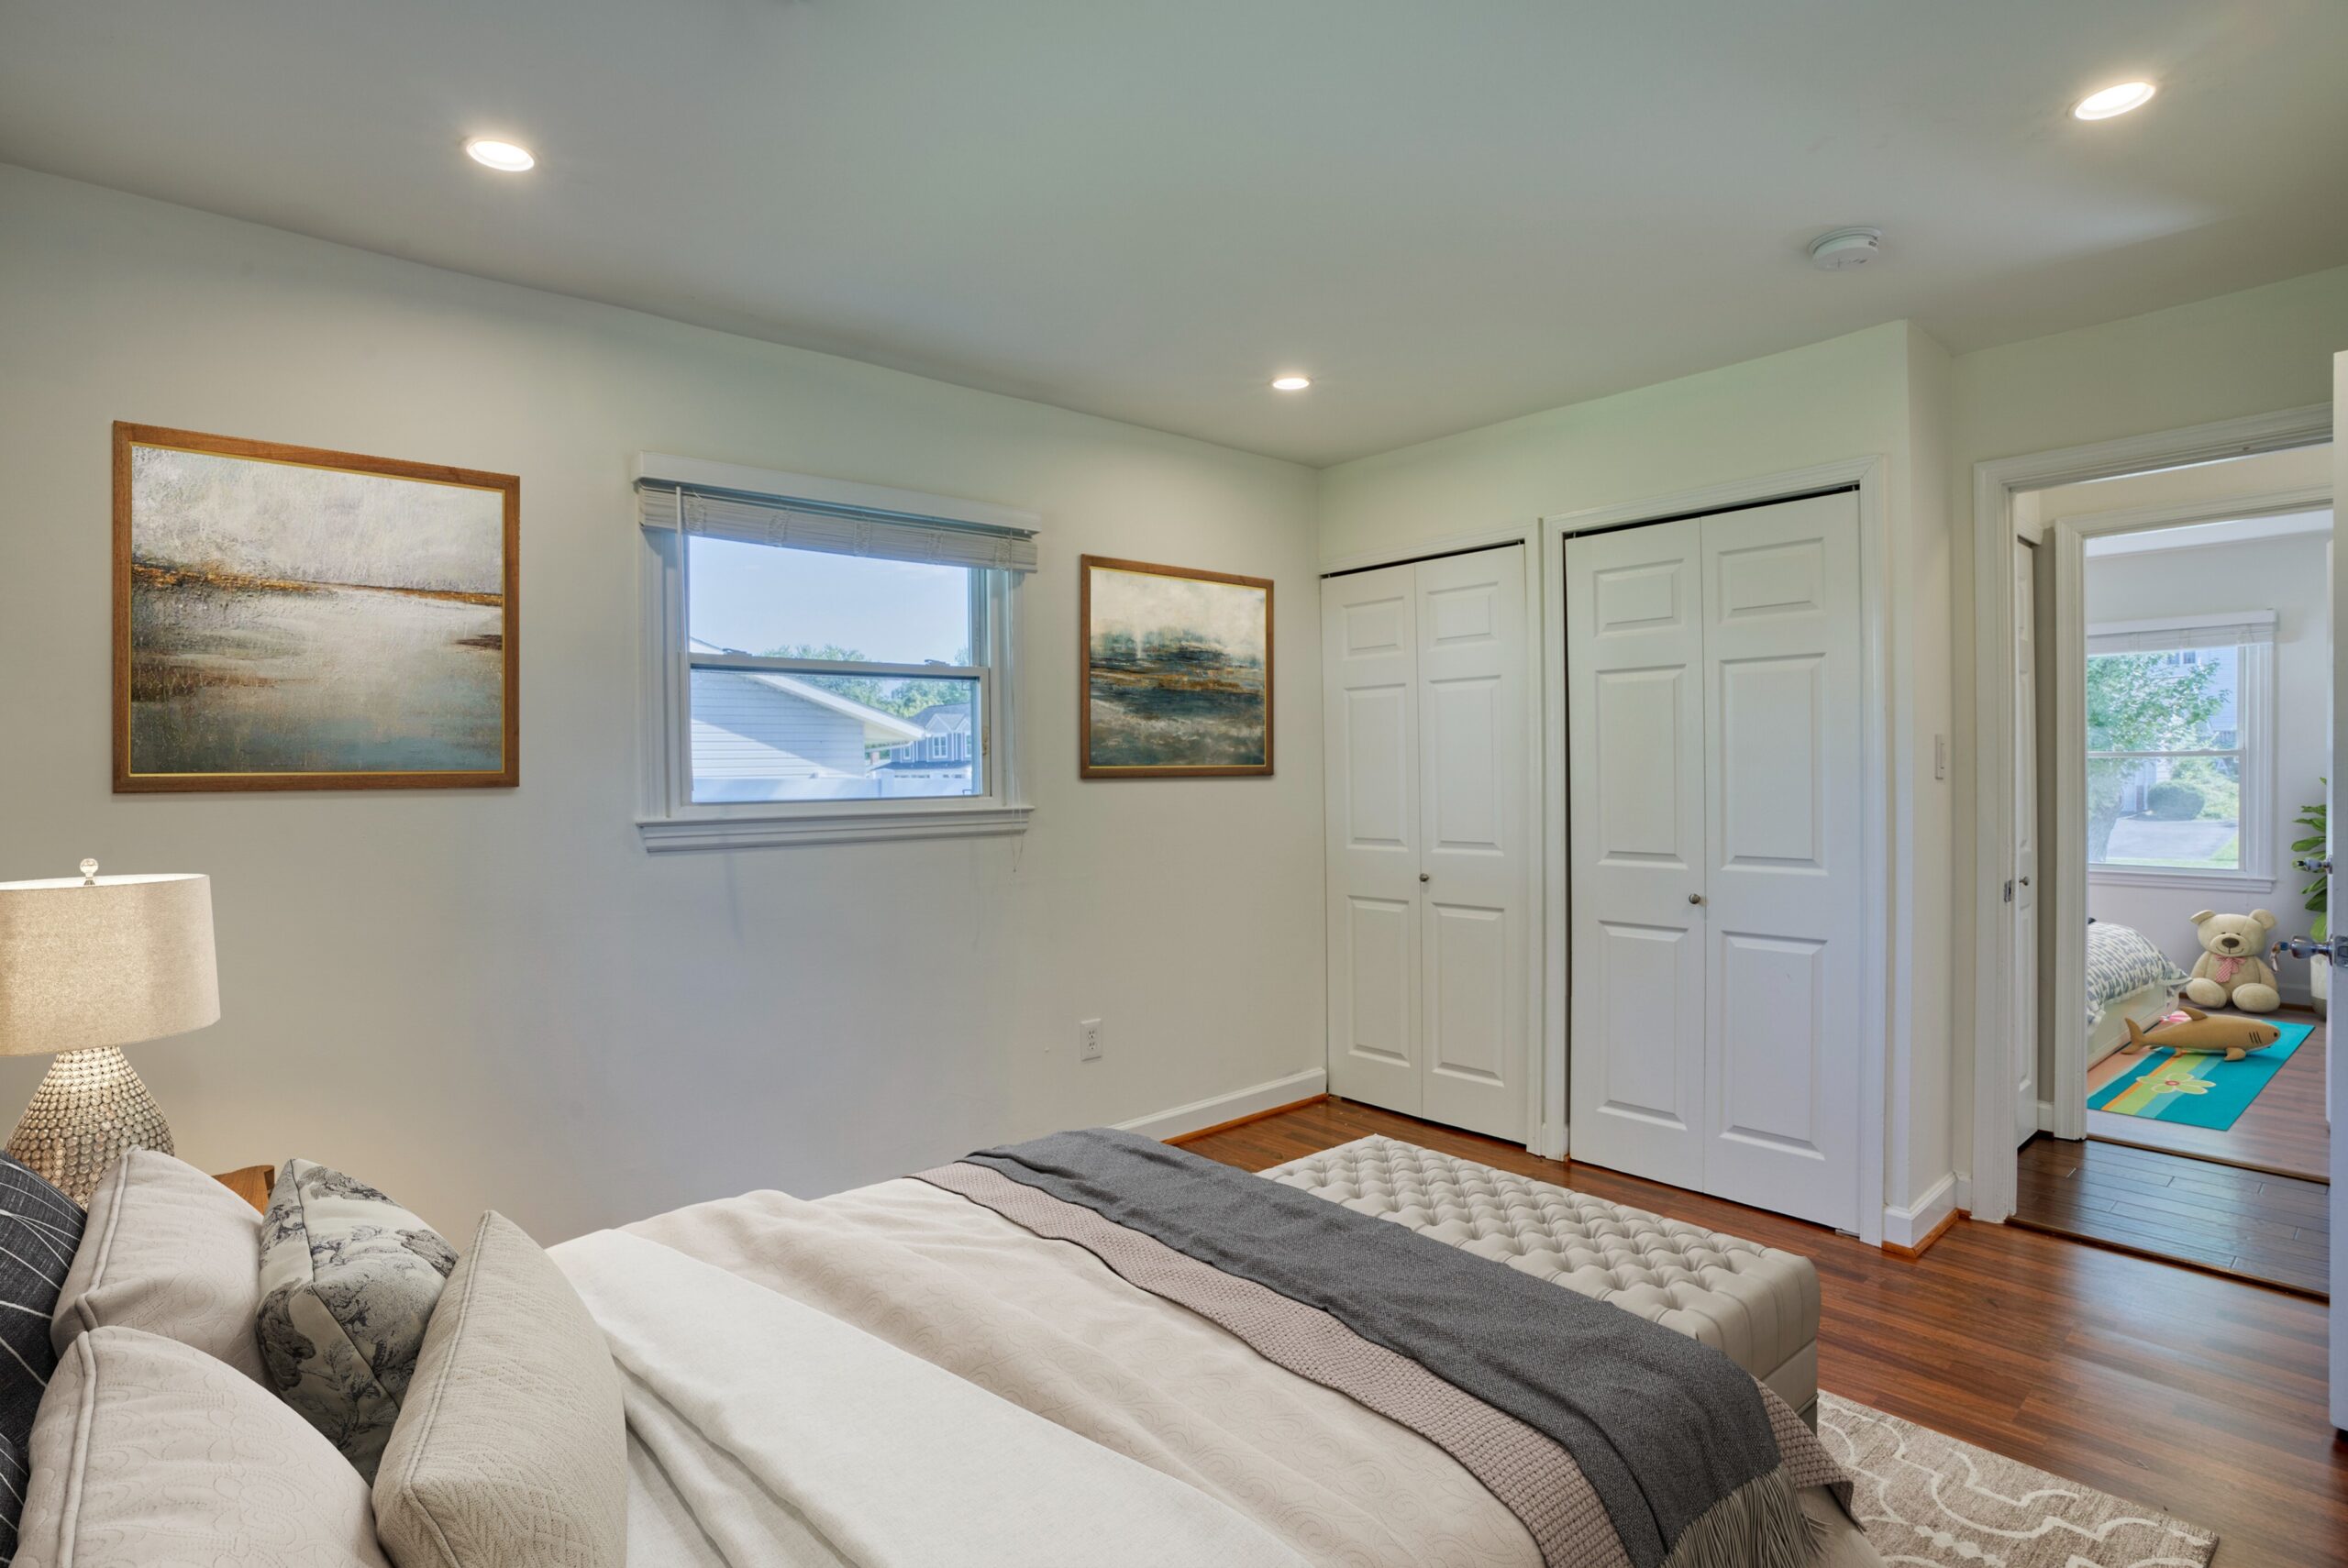 Professional interior photo of 1103 S Greenthorn Ave in Sterling, VA - showing a bedroom with hardwood floors and double door closet which has been virtually staged as a bedroom and second bedroom visible through the hallway has been virtually staged with kids items as well